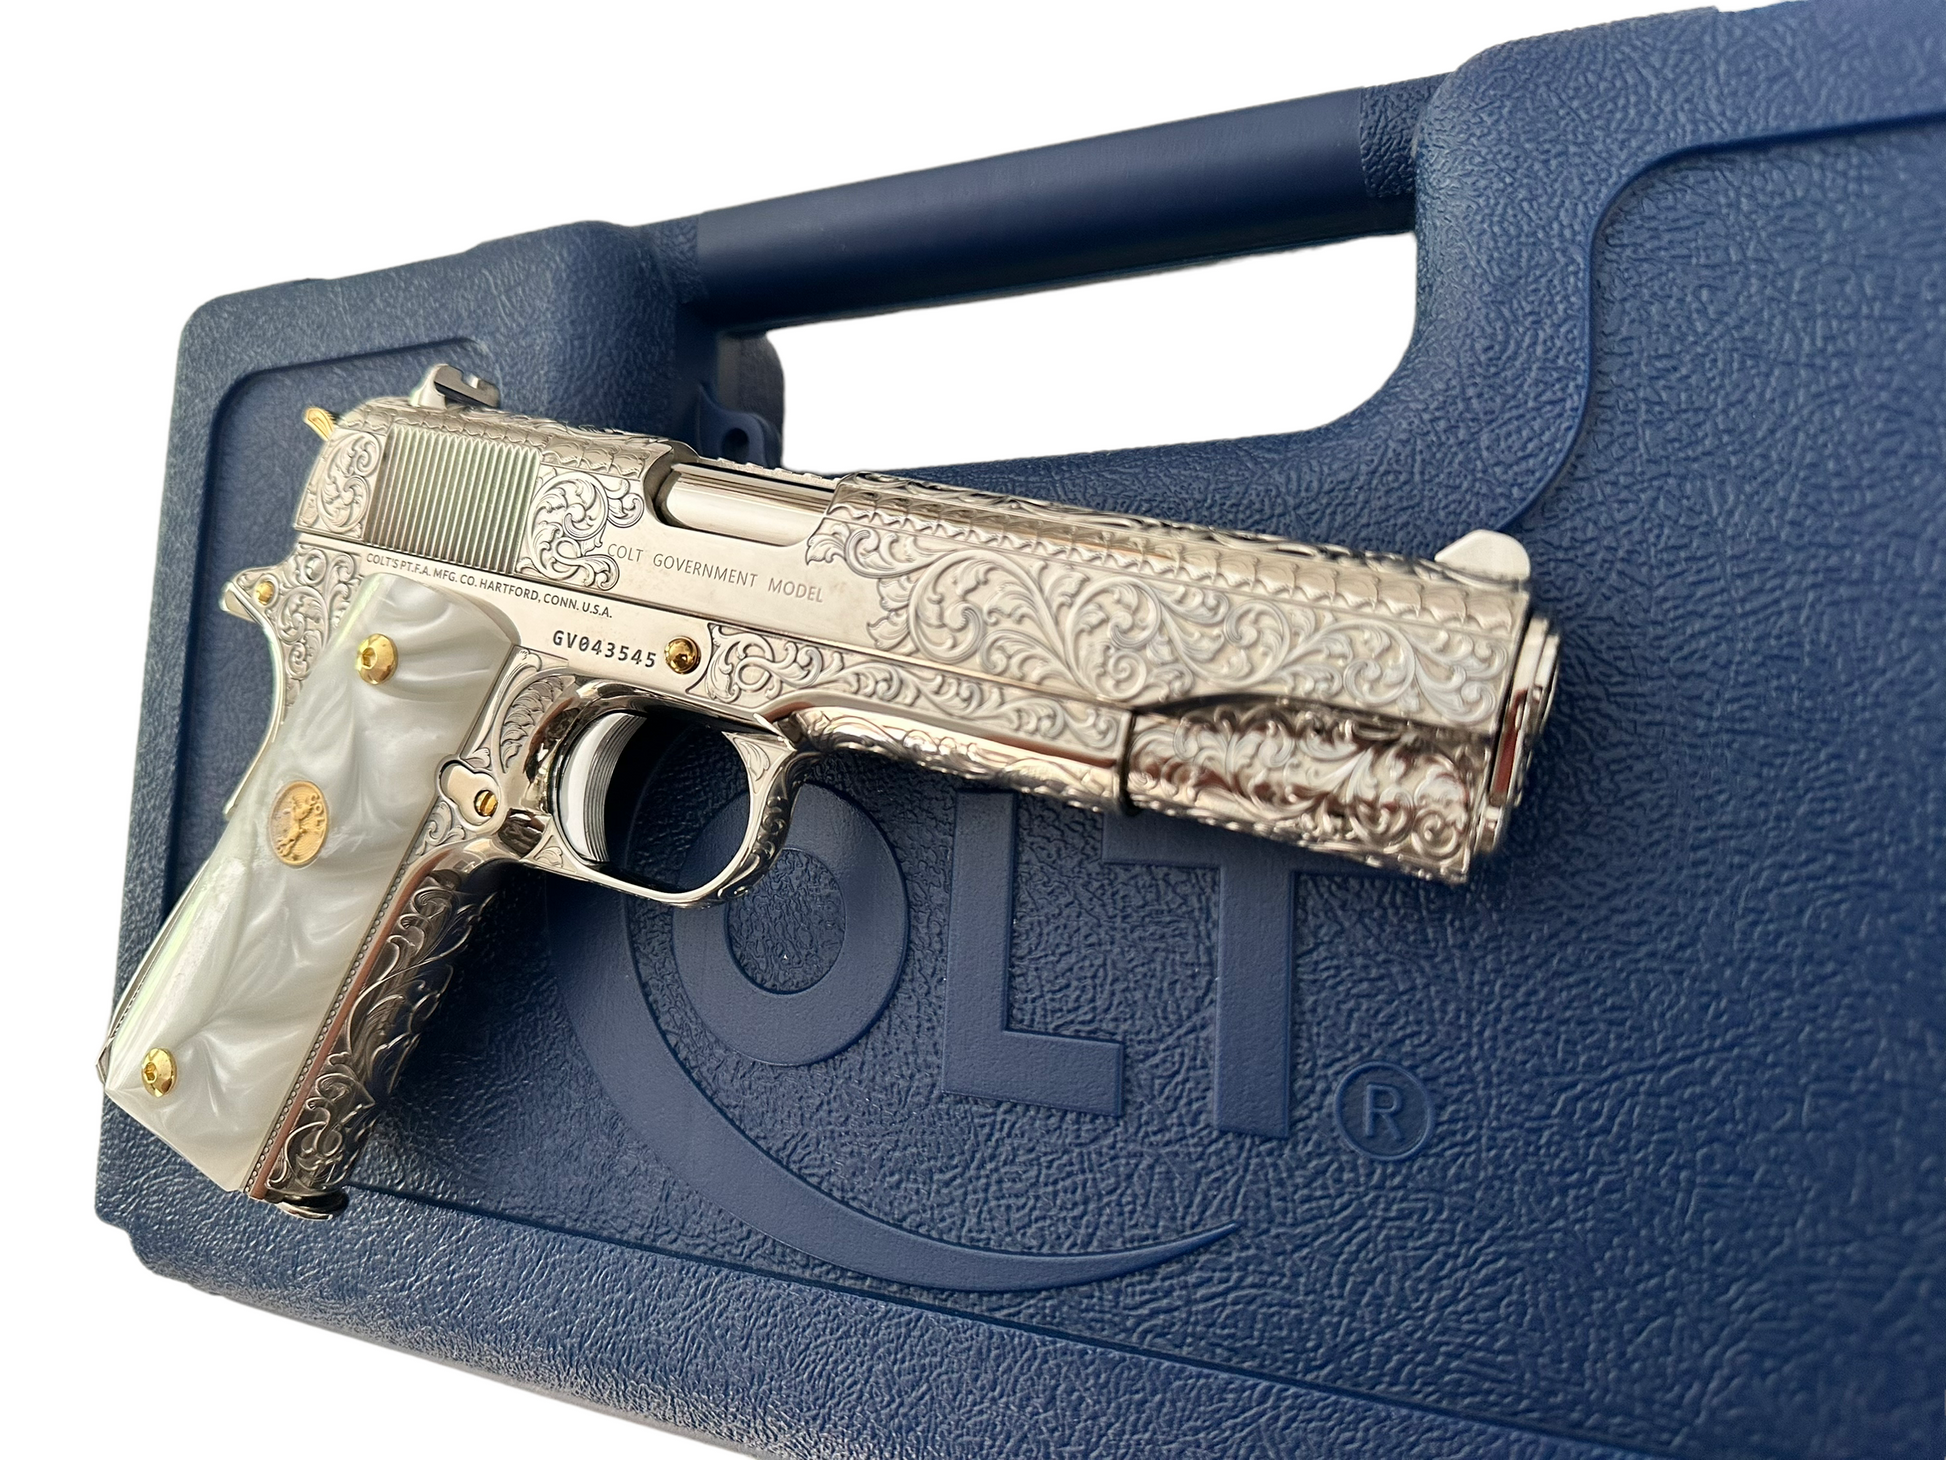 COLT CUSTOM 1911 FULLY ENGRAVED, NICKEL PLATED AND 24K GOLD PLATED ...